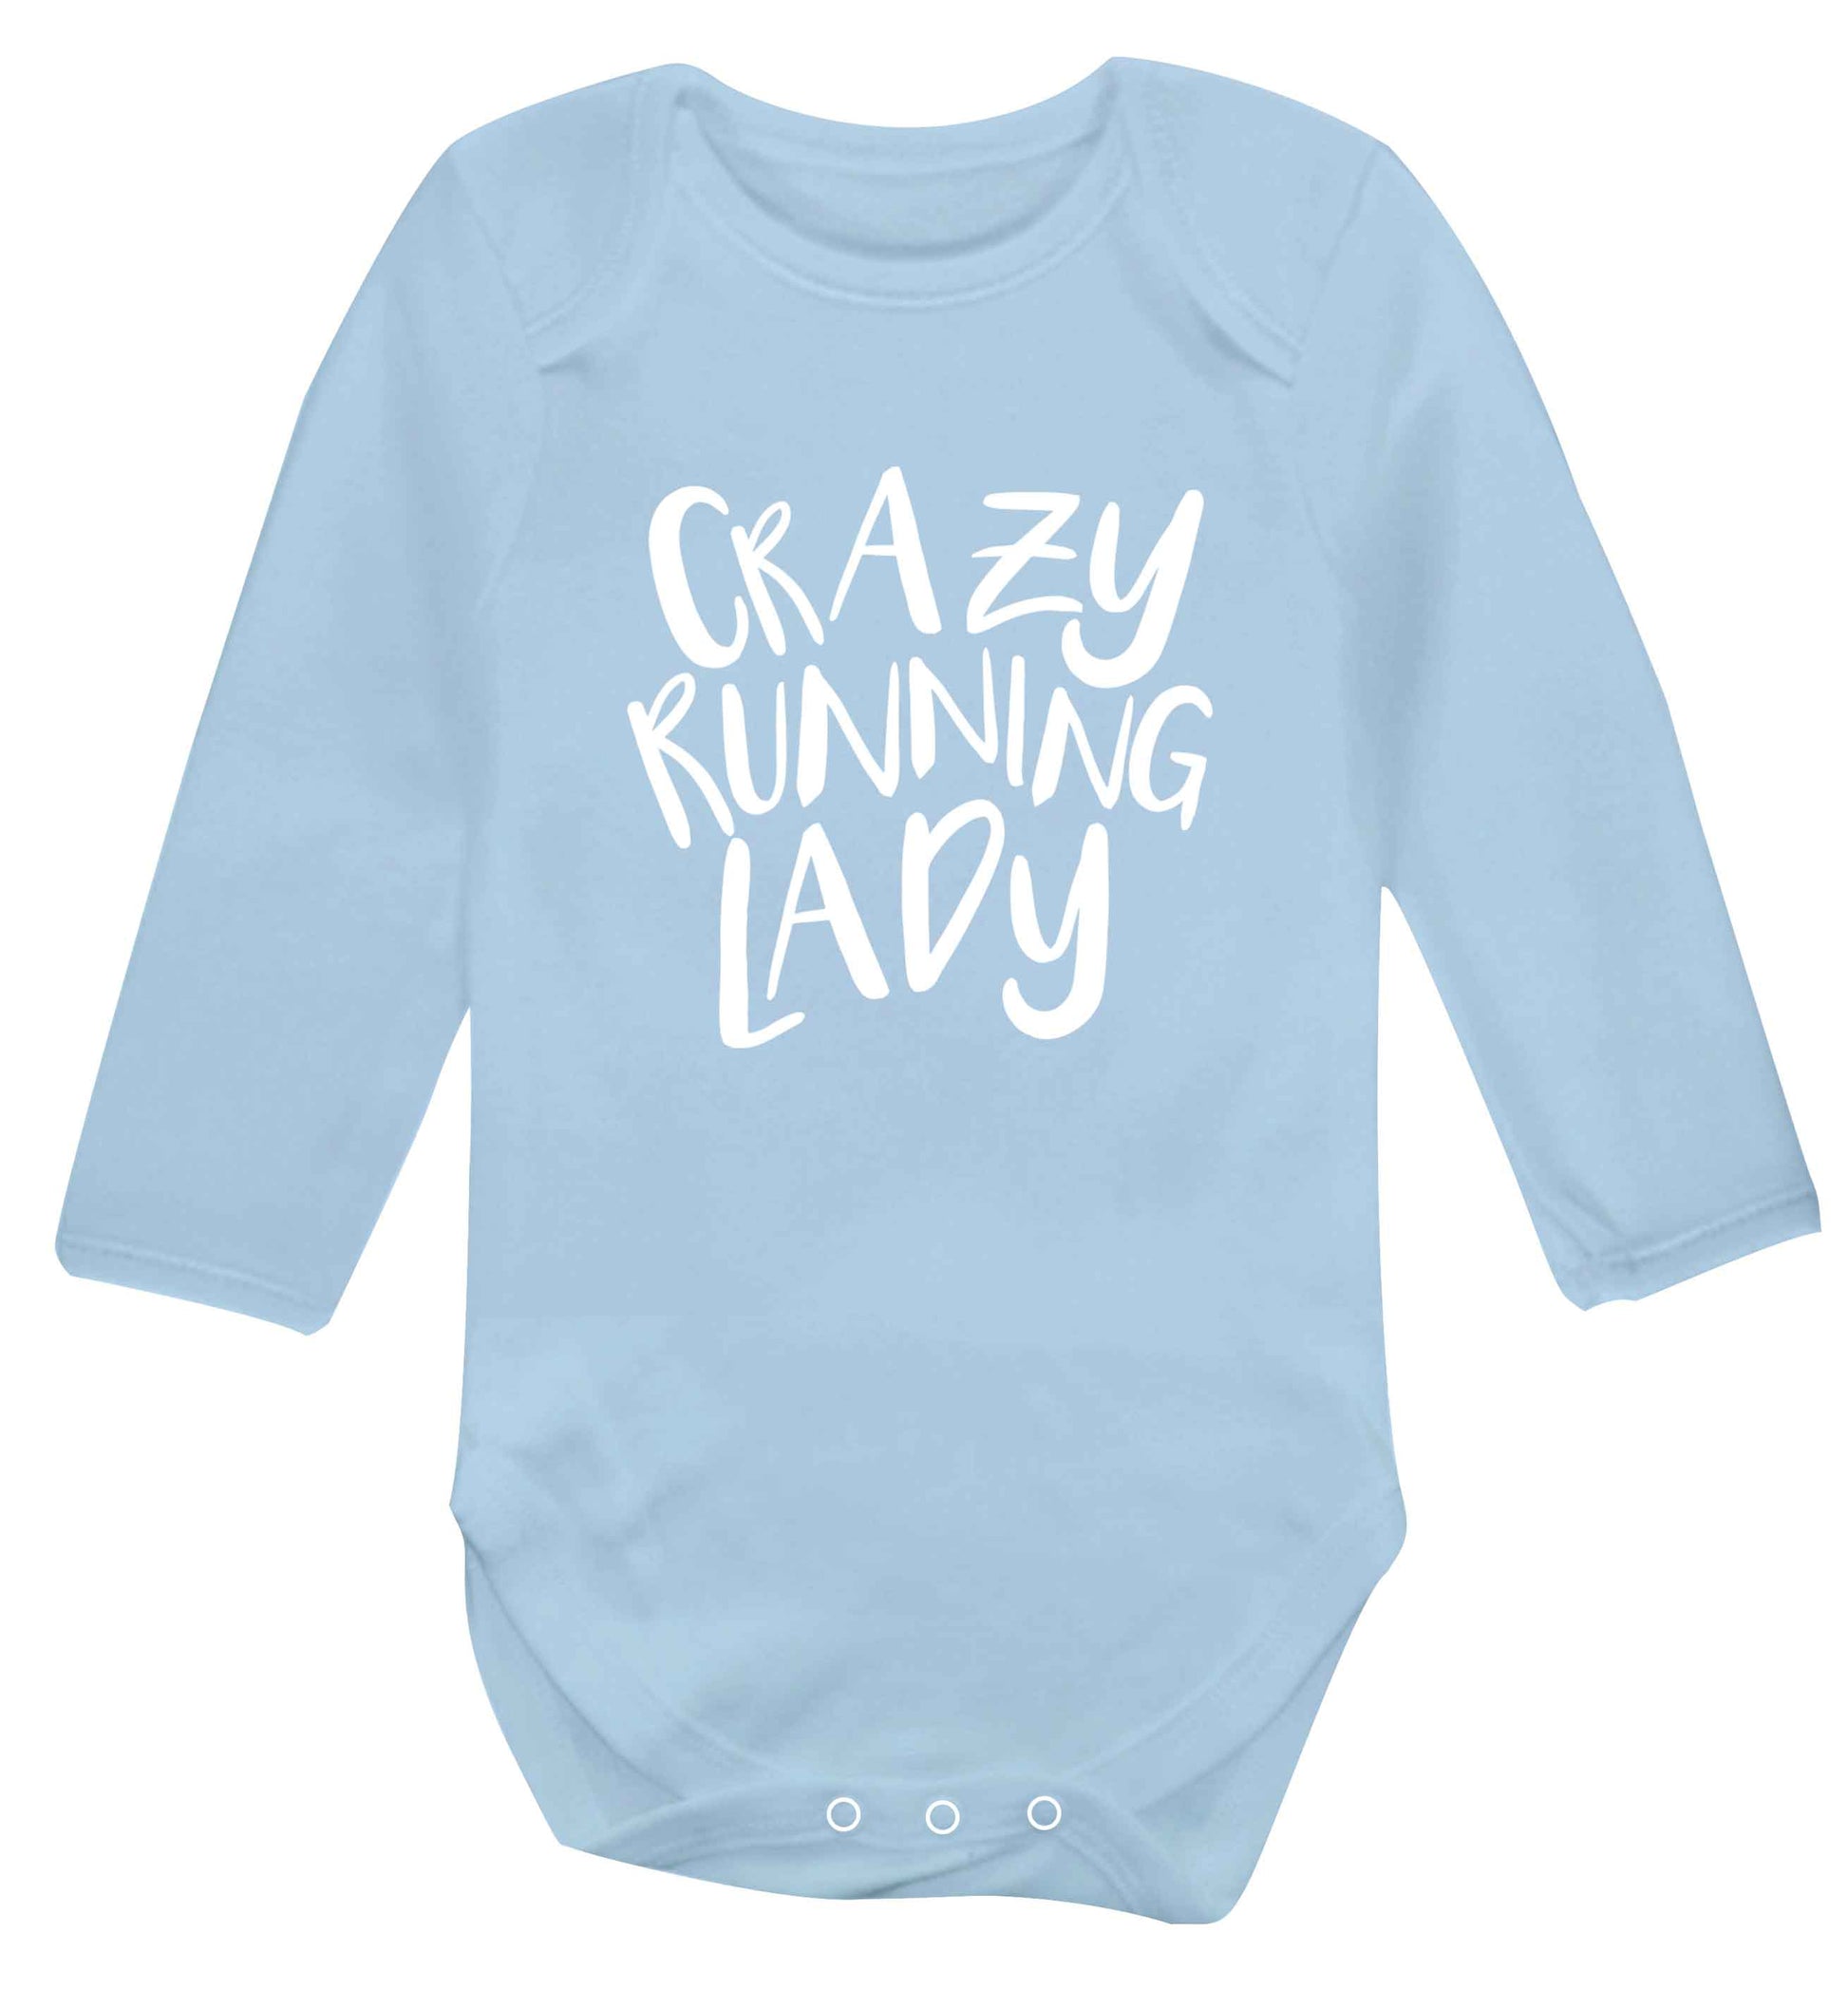 Crazy running lady baby vest long sleeved pale blue 6-12 months